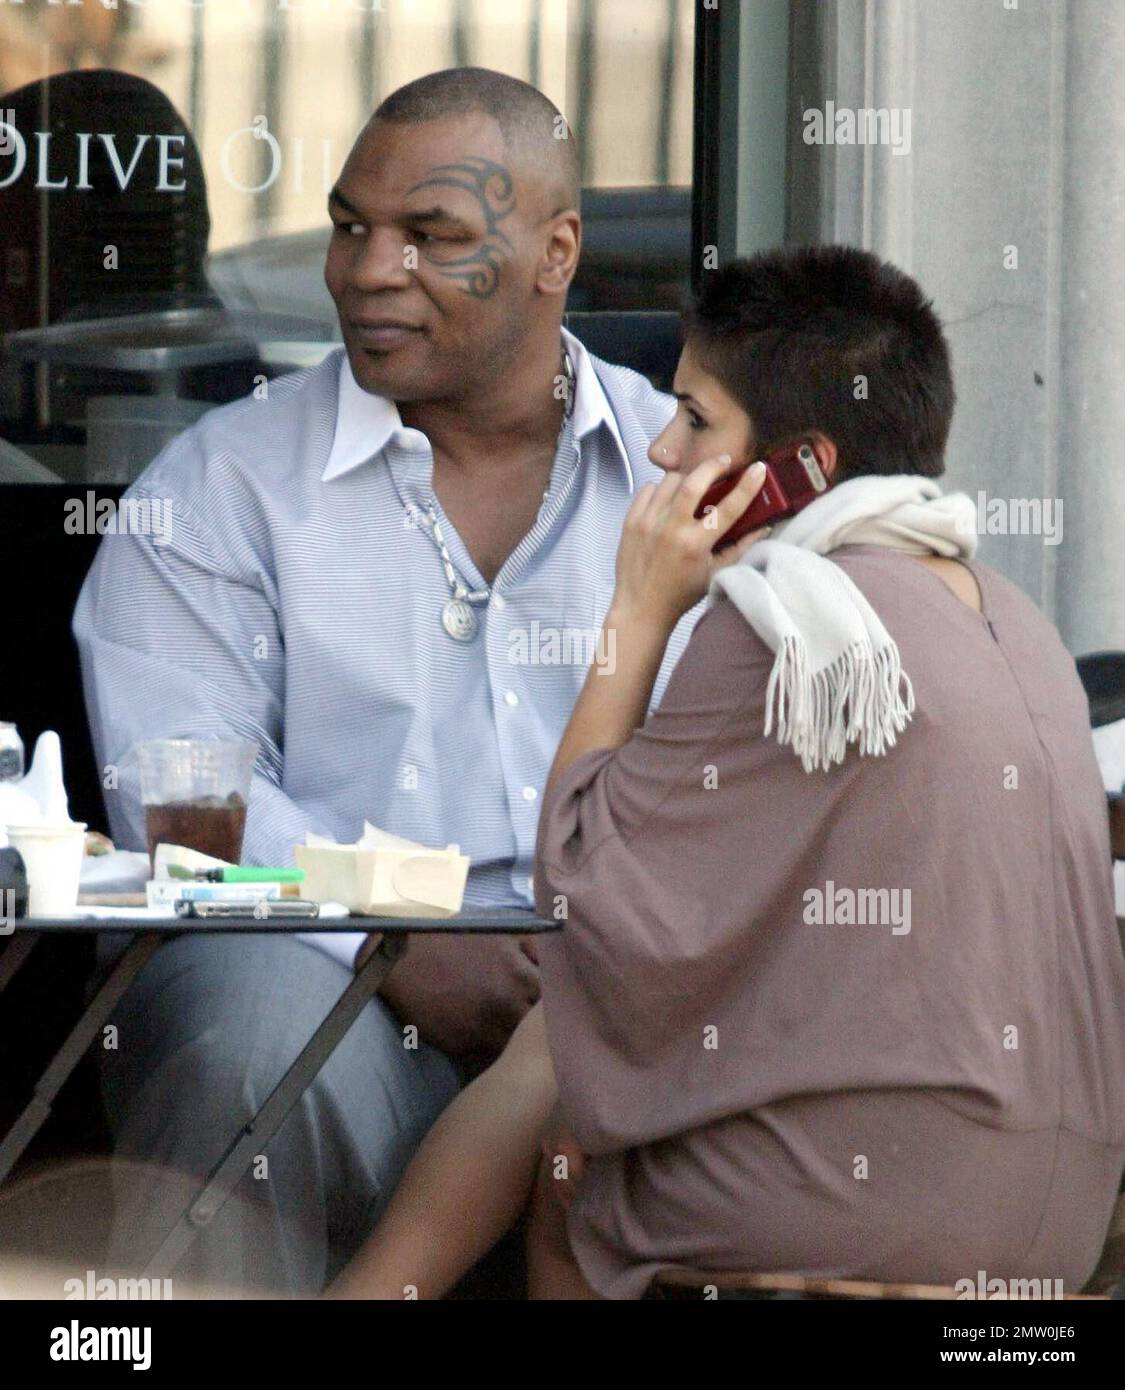 Mike Tyson lunches with two female friends at Joans On Third. Tyson is reportedly in talks for a potential third boxing rematch with Evander Holyfield. Tyson was disqualified during their last bout in 1997 when Tyson  took a bite out Holyfield's ear. Los Angeles, Ca. 3/5/08. Stock Photo